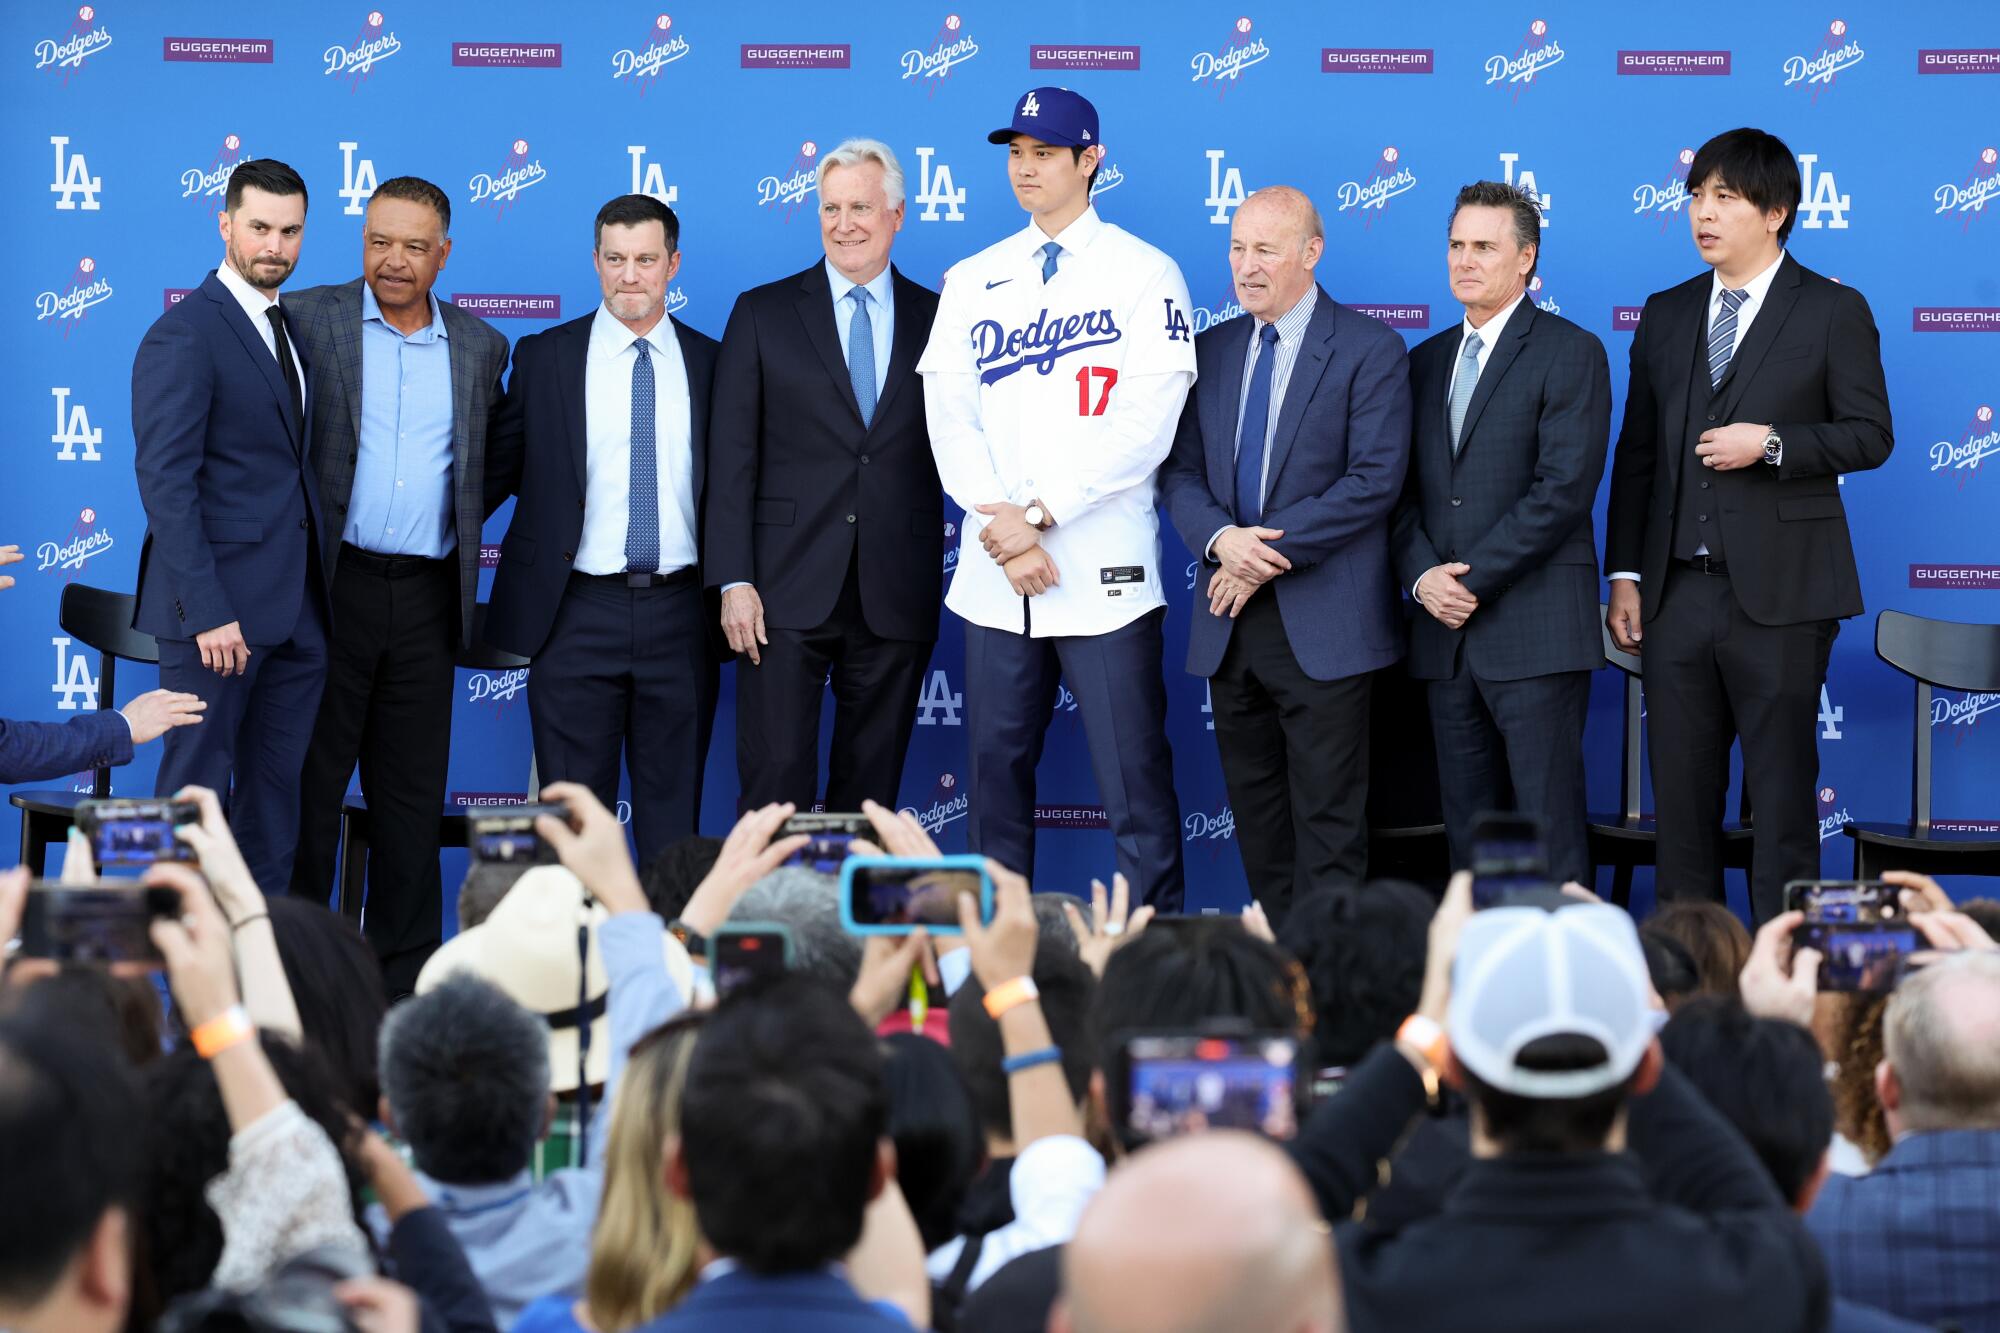 Shohei Ohtani stands with members of the Dodgers' front office after formally being introduced as a Dodger.